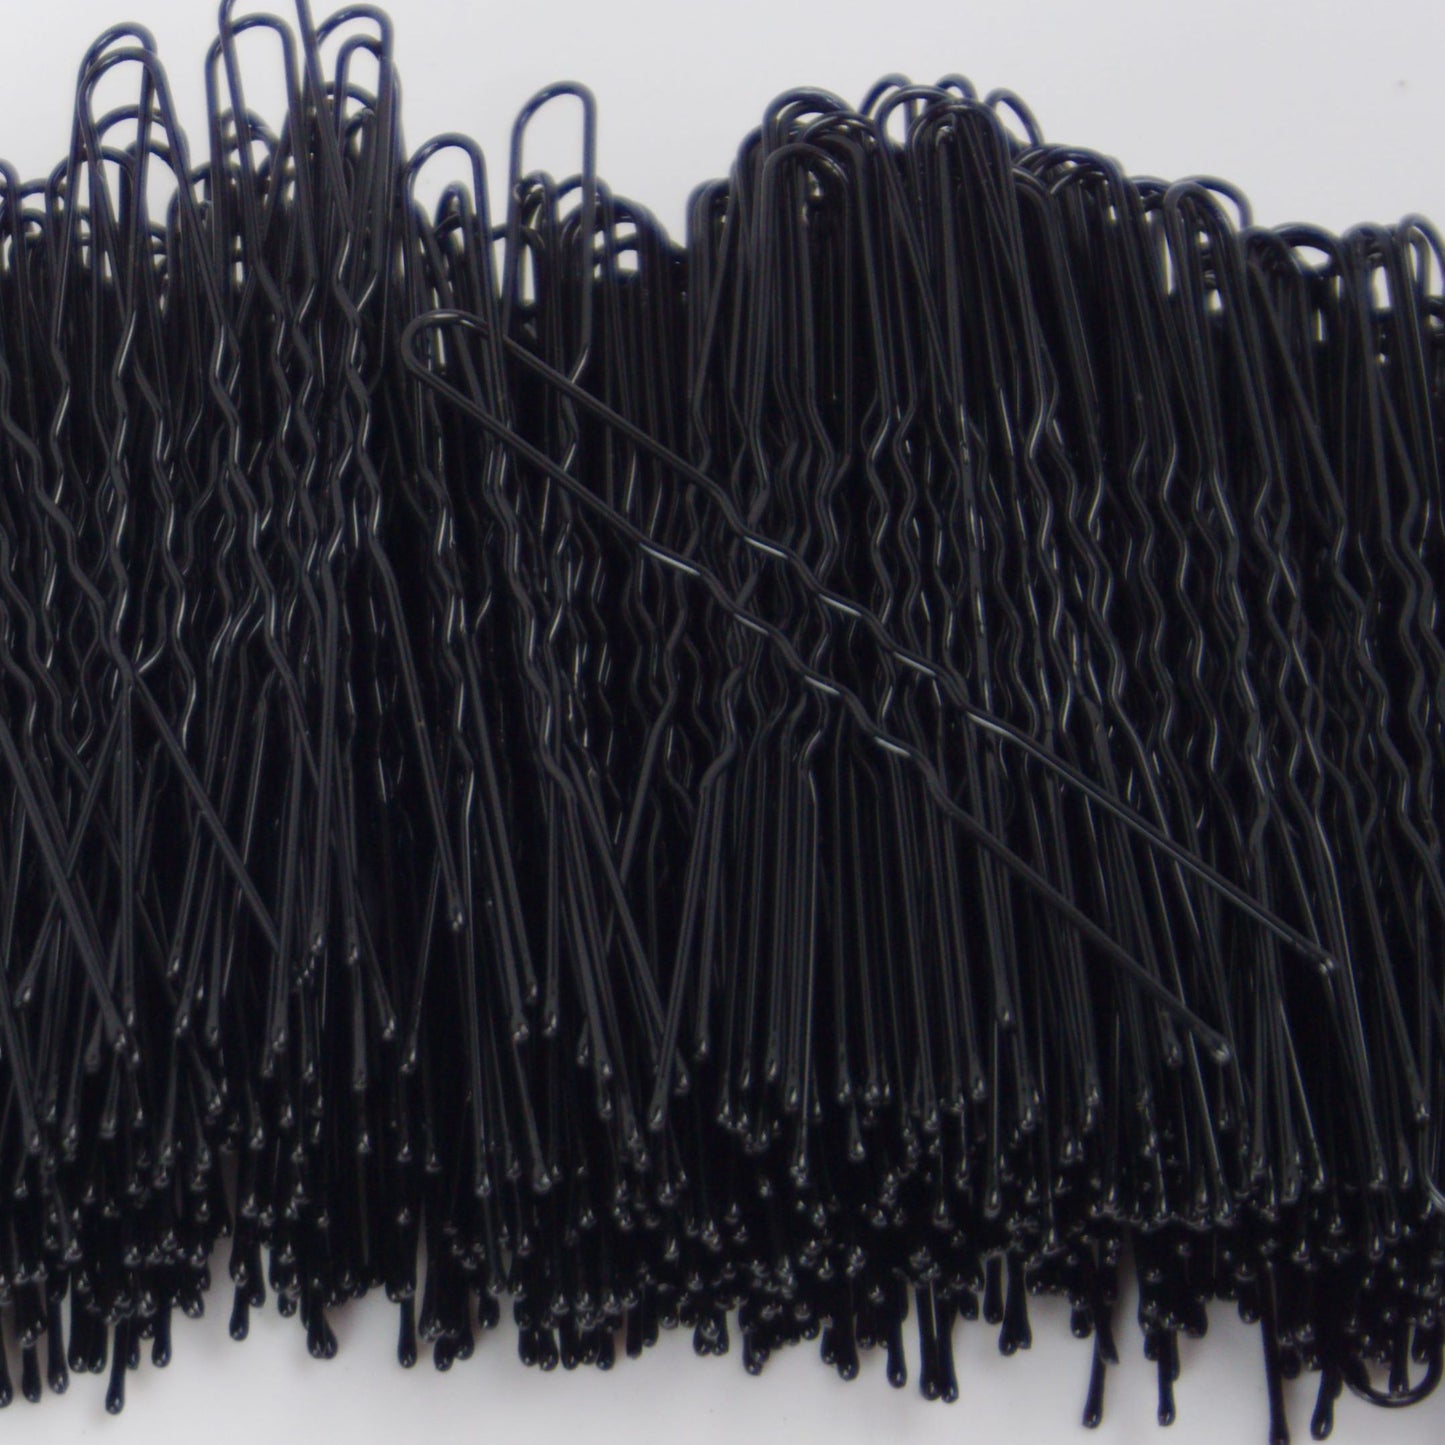 950, Black, 2.0in (5.0cm), Italian Made Waved Hair Pins, Recloseable Stay Clean and Organized Container